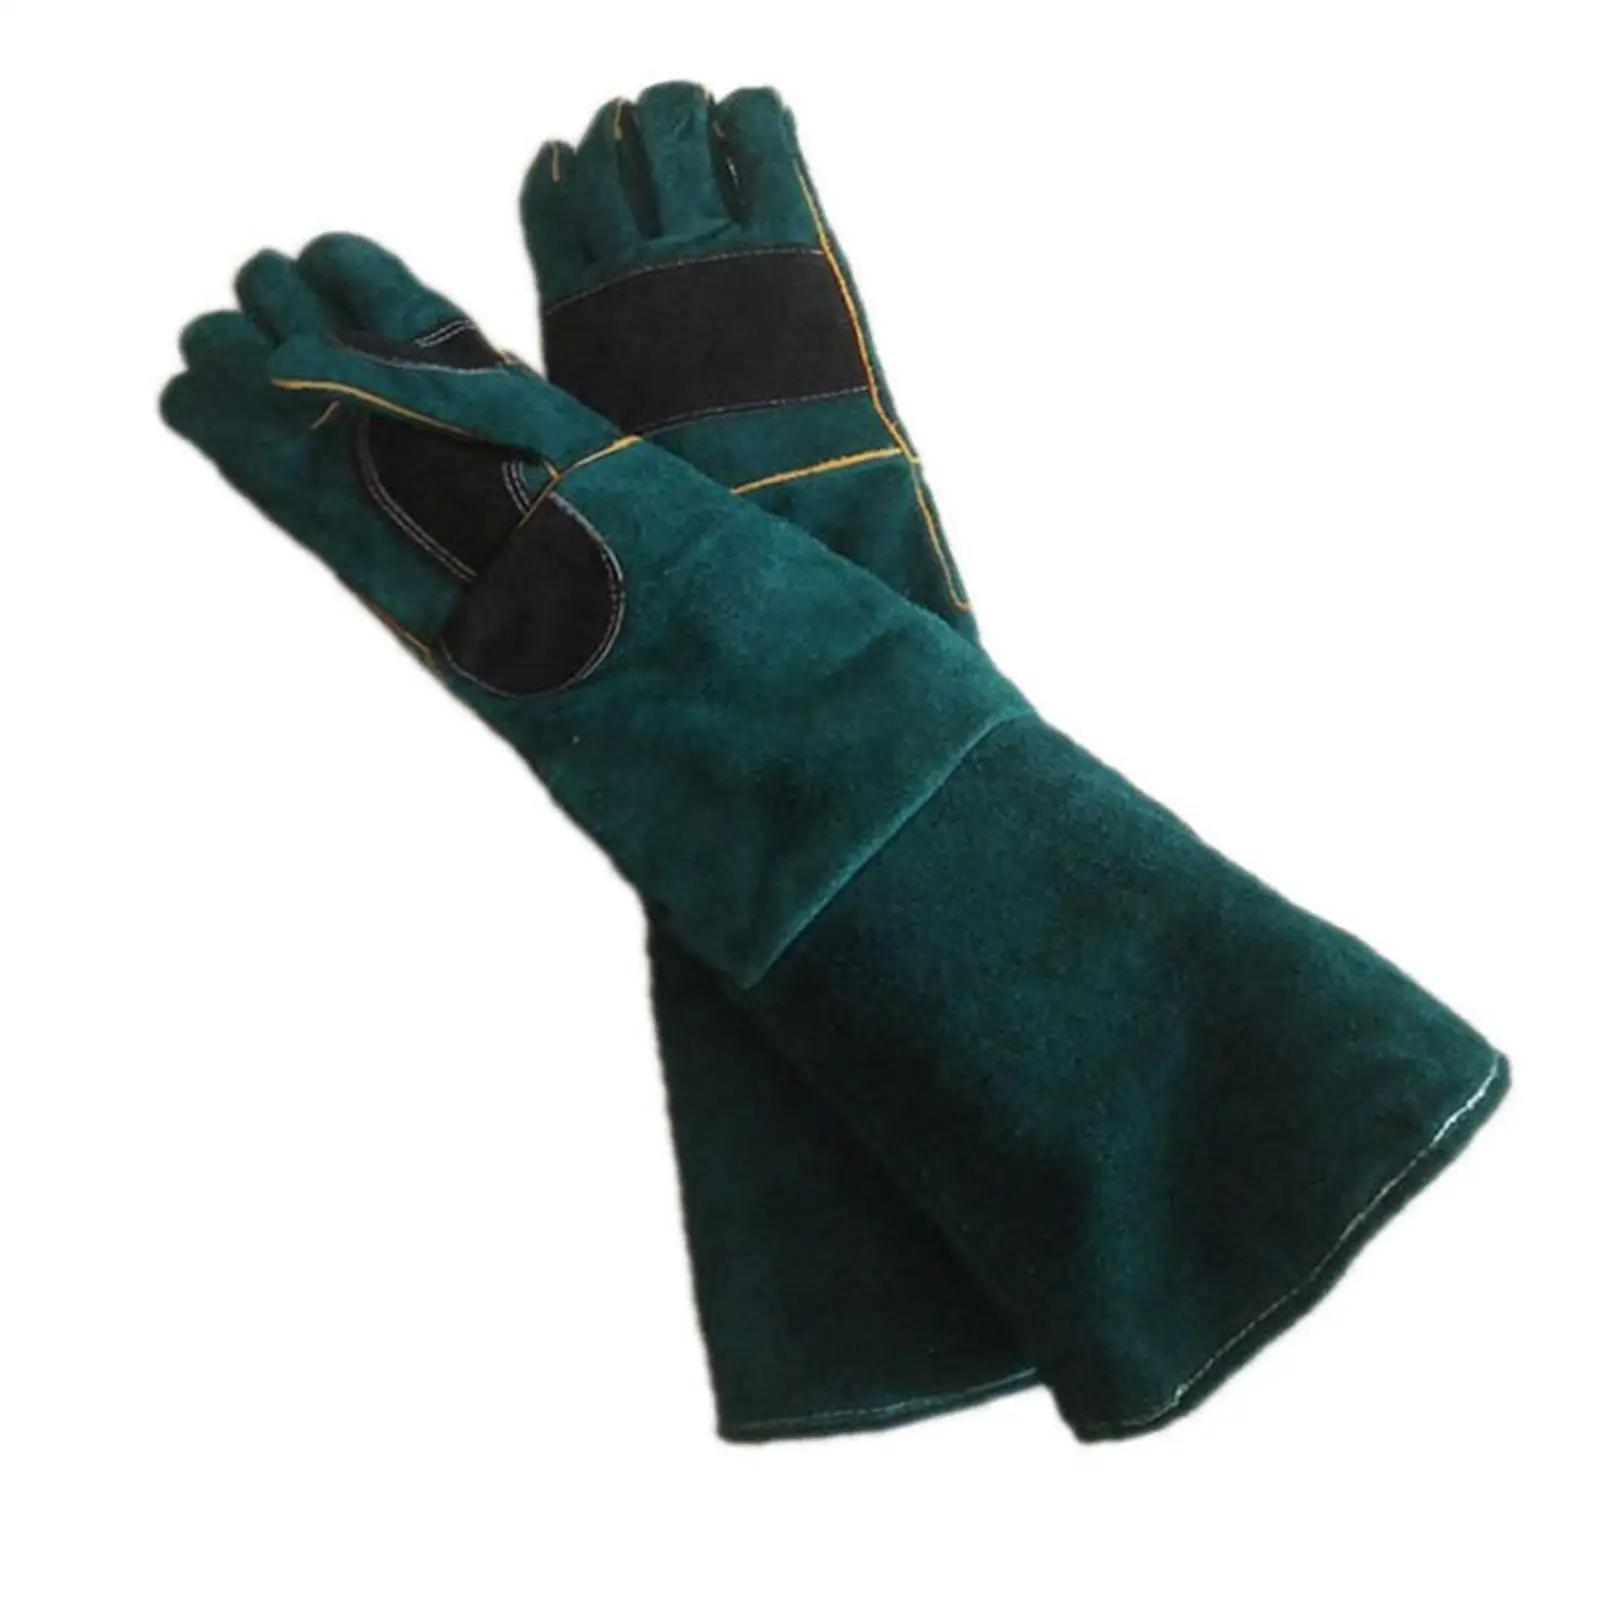 Animal Handling Gloves Portable Dexterity Anti Bite Protective Gloves for Dogs Pet Shop Kennel Workers Birds Reptile